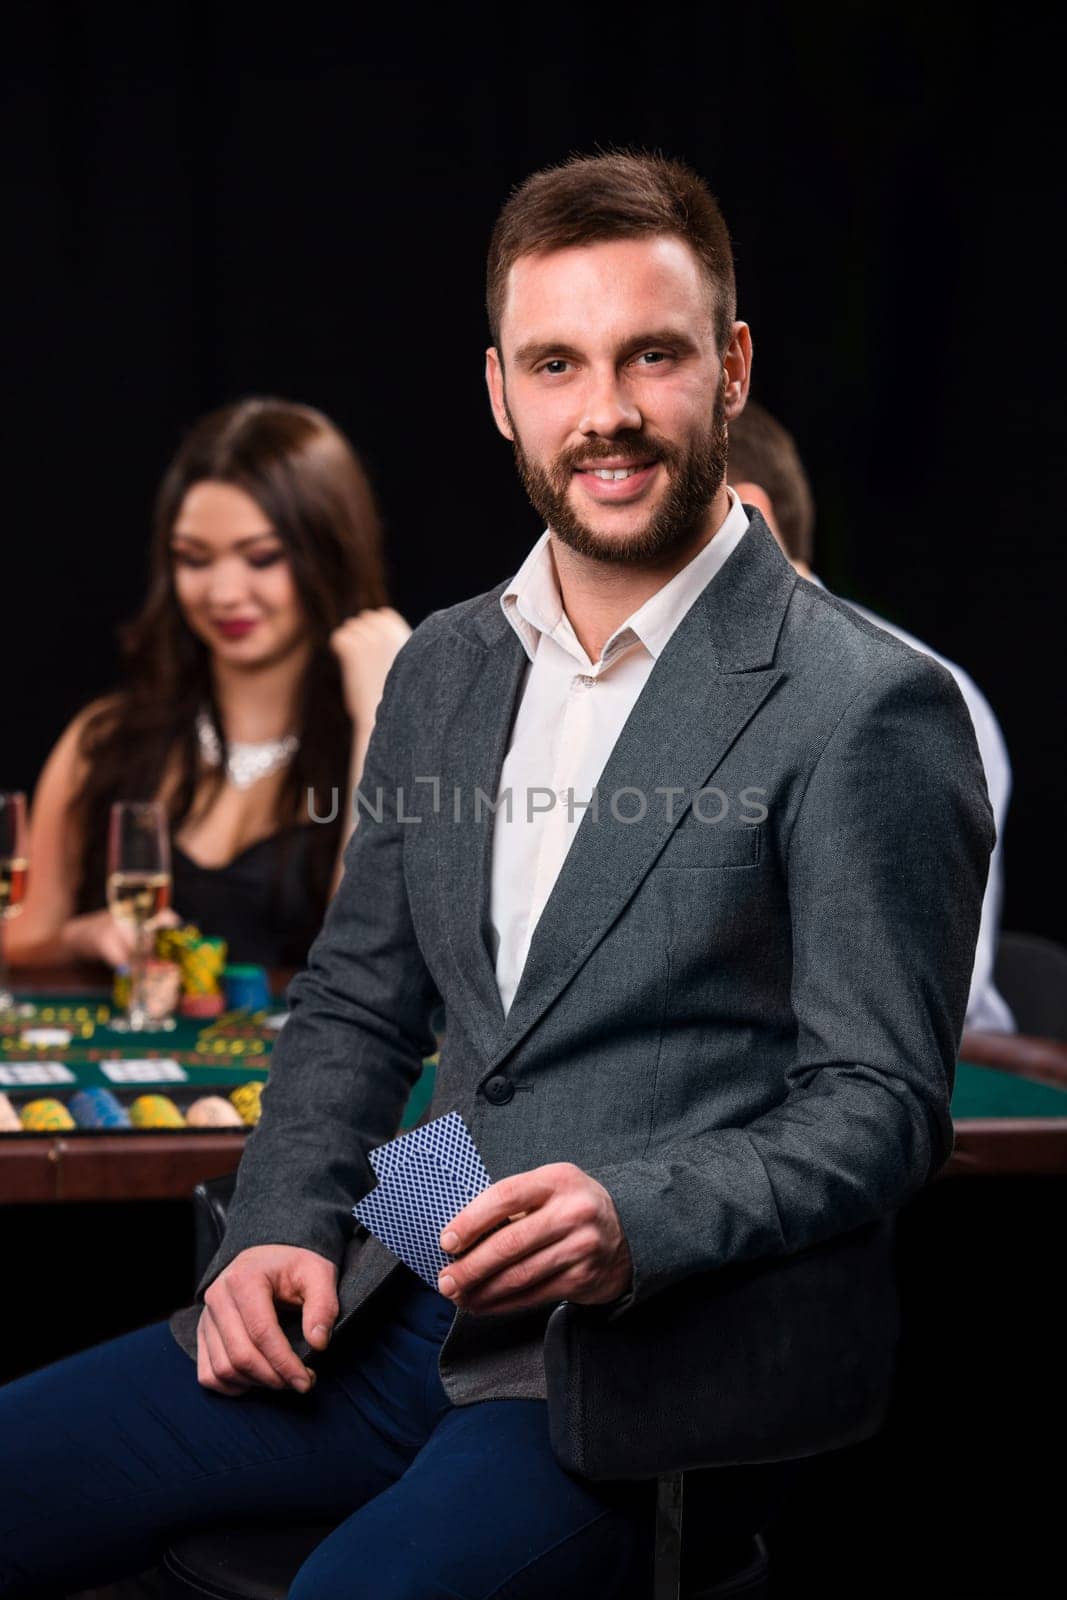 Poker players in casino with cards and chips on black background. A handsome man in the foreground, behind a game table.